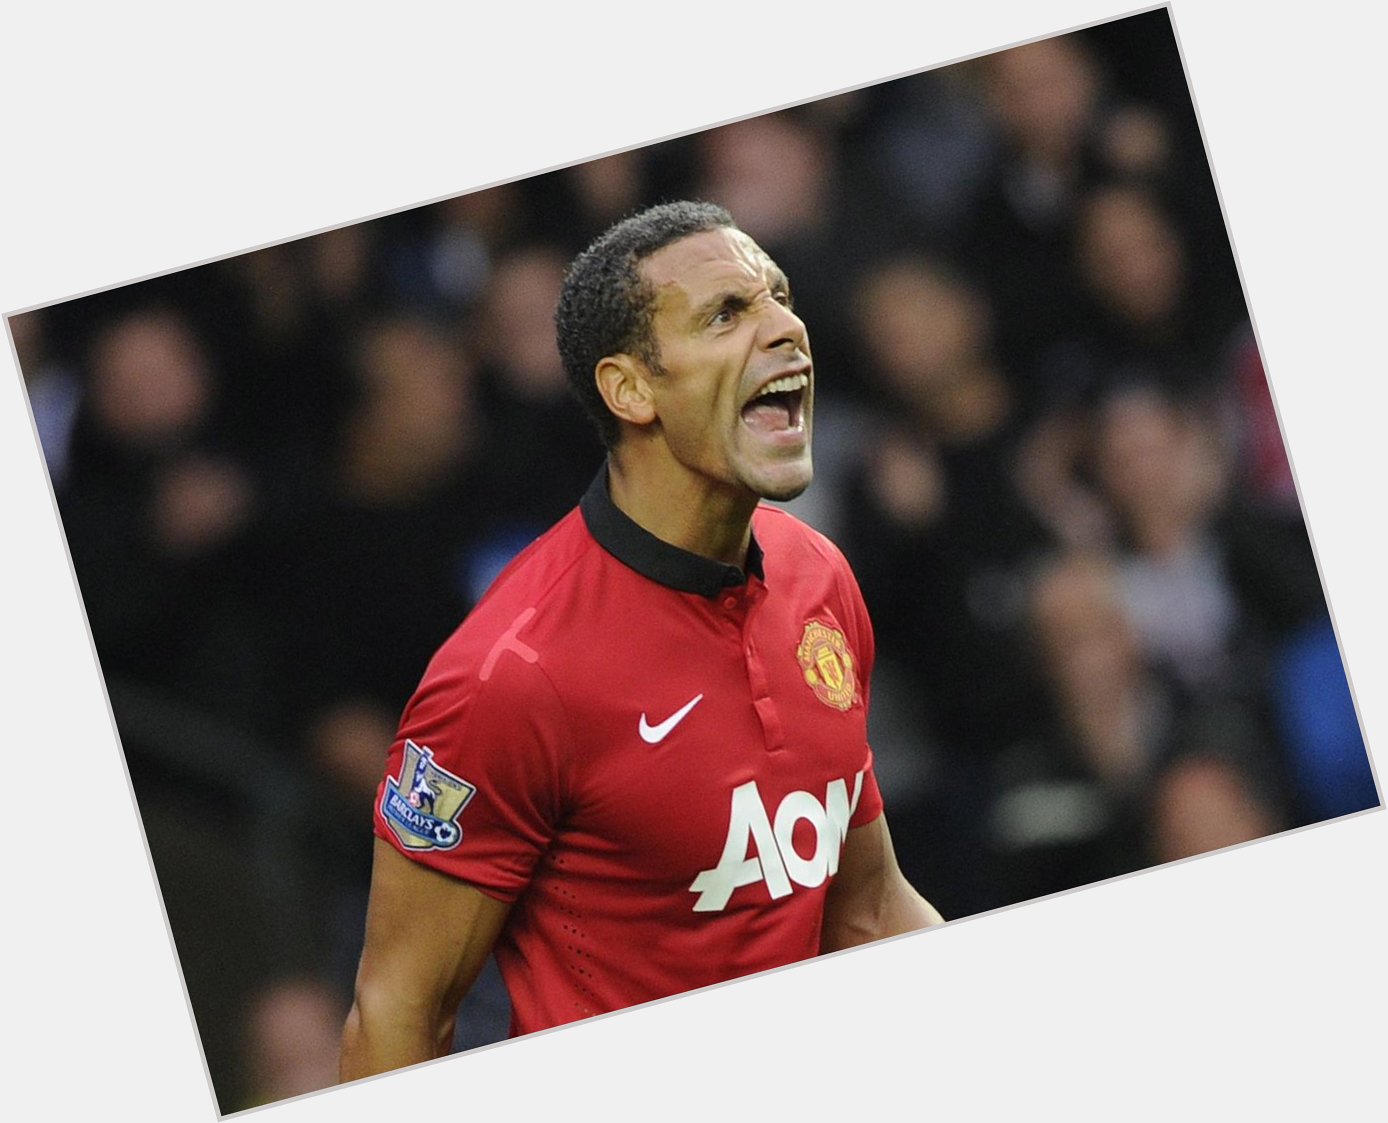 Happy 36th birthday to Rio Ferdinand today. He won 6 Premier League titles during a 12-year stay at Man Utd. 